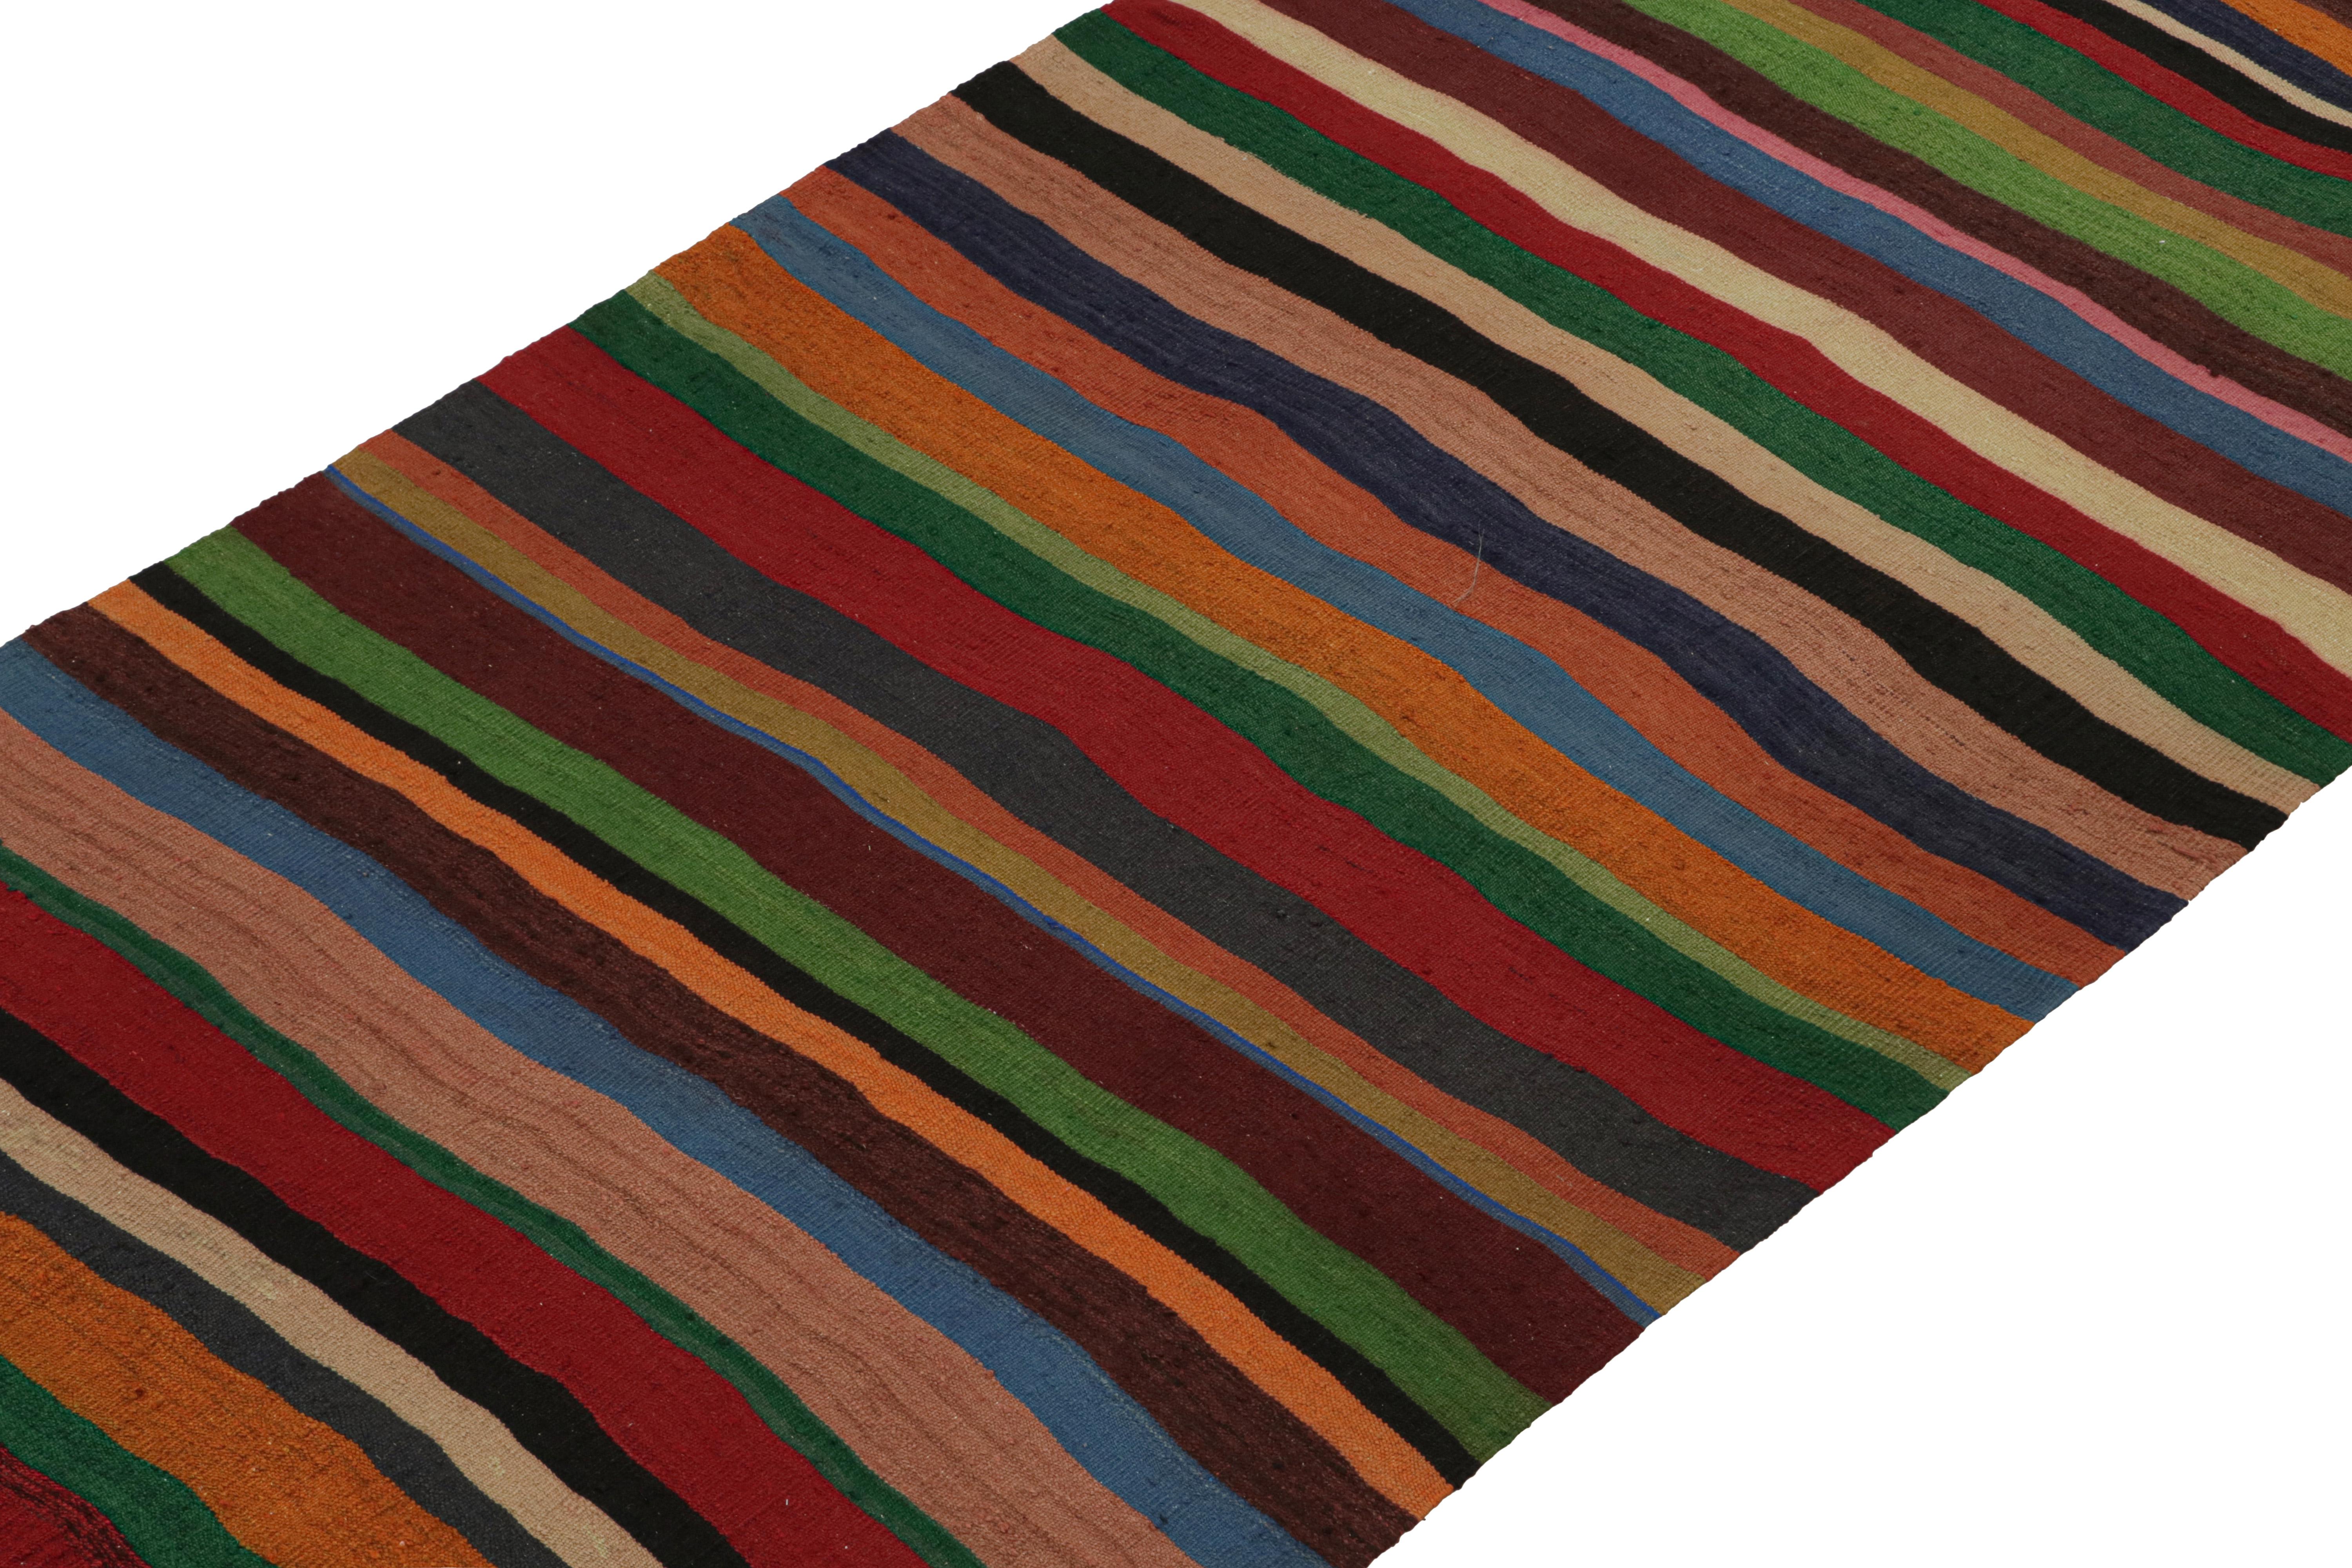 This vintage 4x13 Persian Kilim is believed to be a midcentury Shahsavan rug, handwoven in wool circa 1950-1960.

On the Design: 

This flat weave enjoys an all over pattern with stripes in rich and saturated polychromatic colorways. It’s a